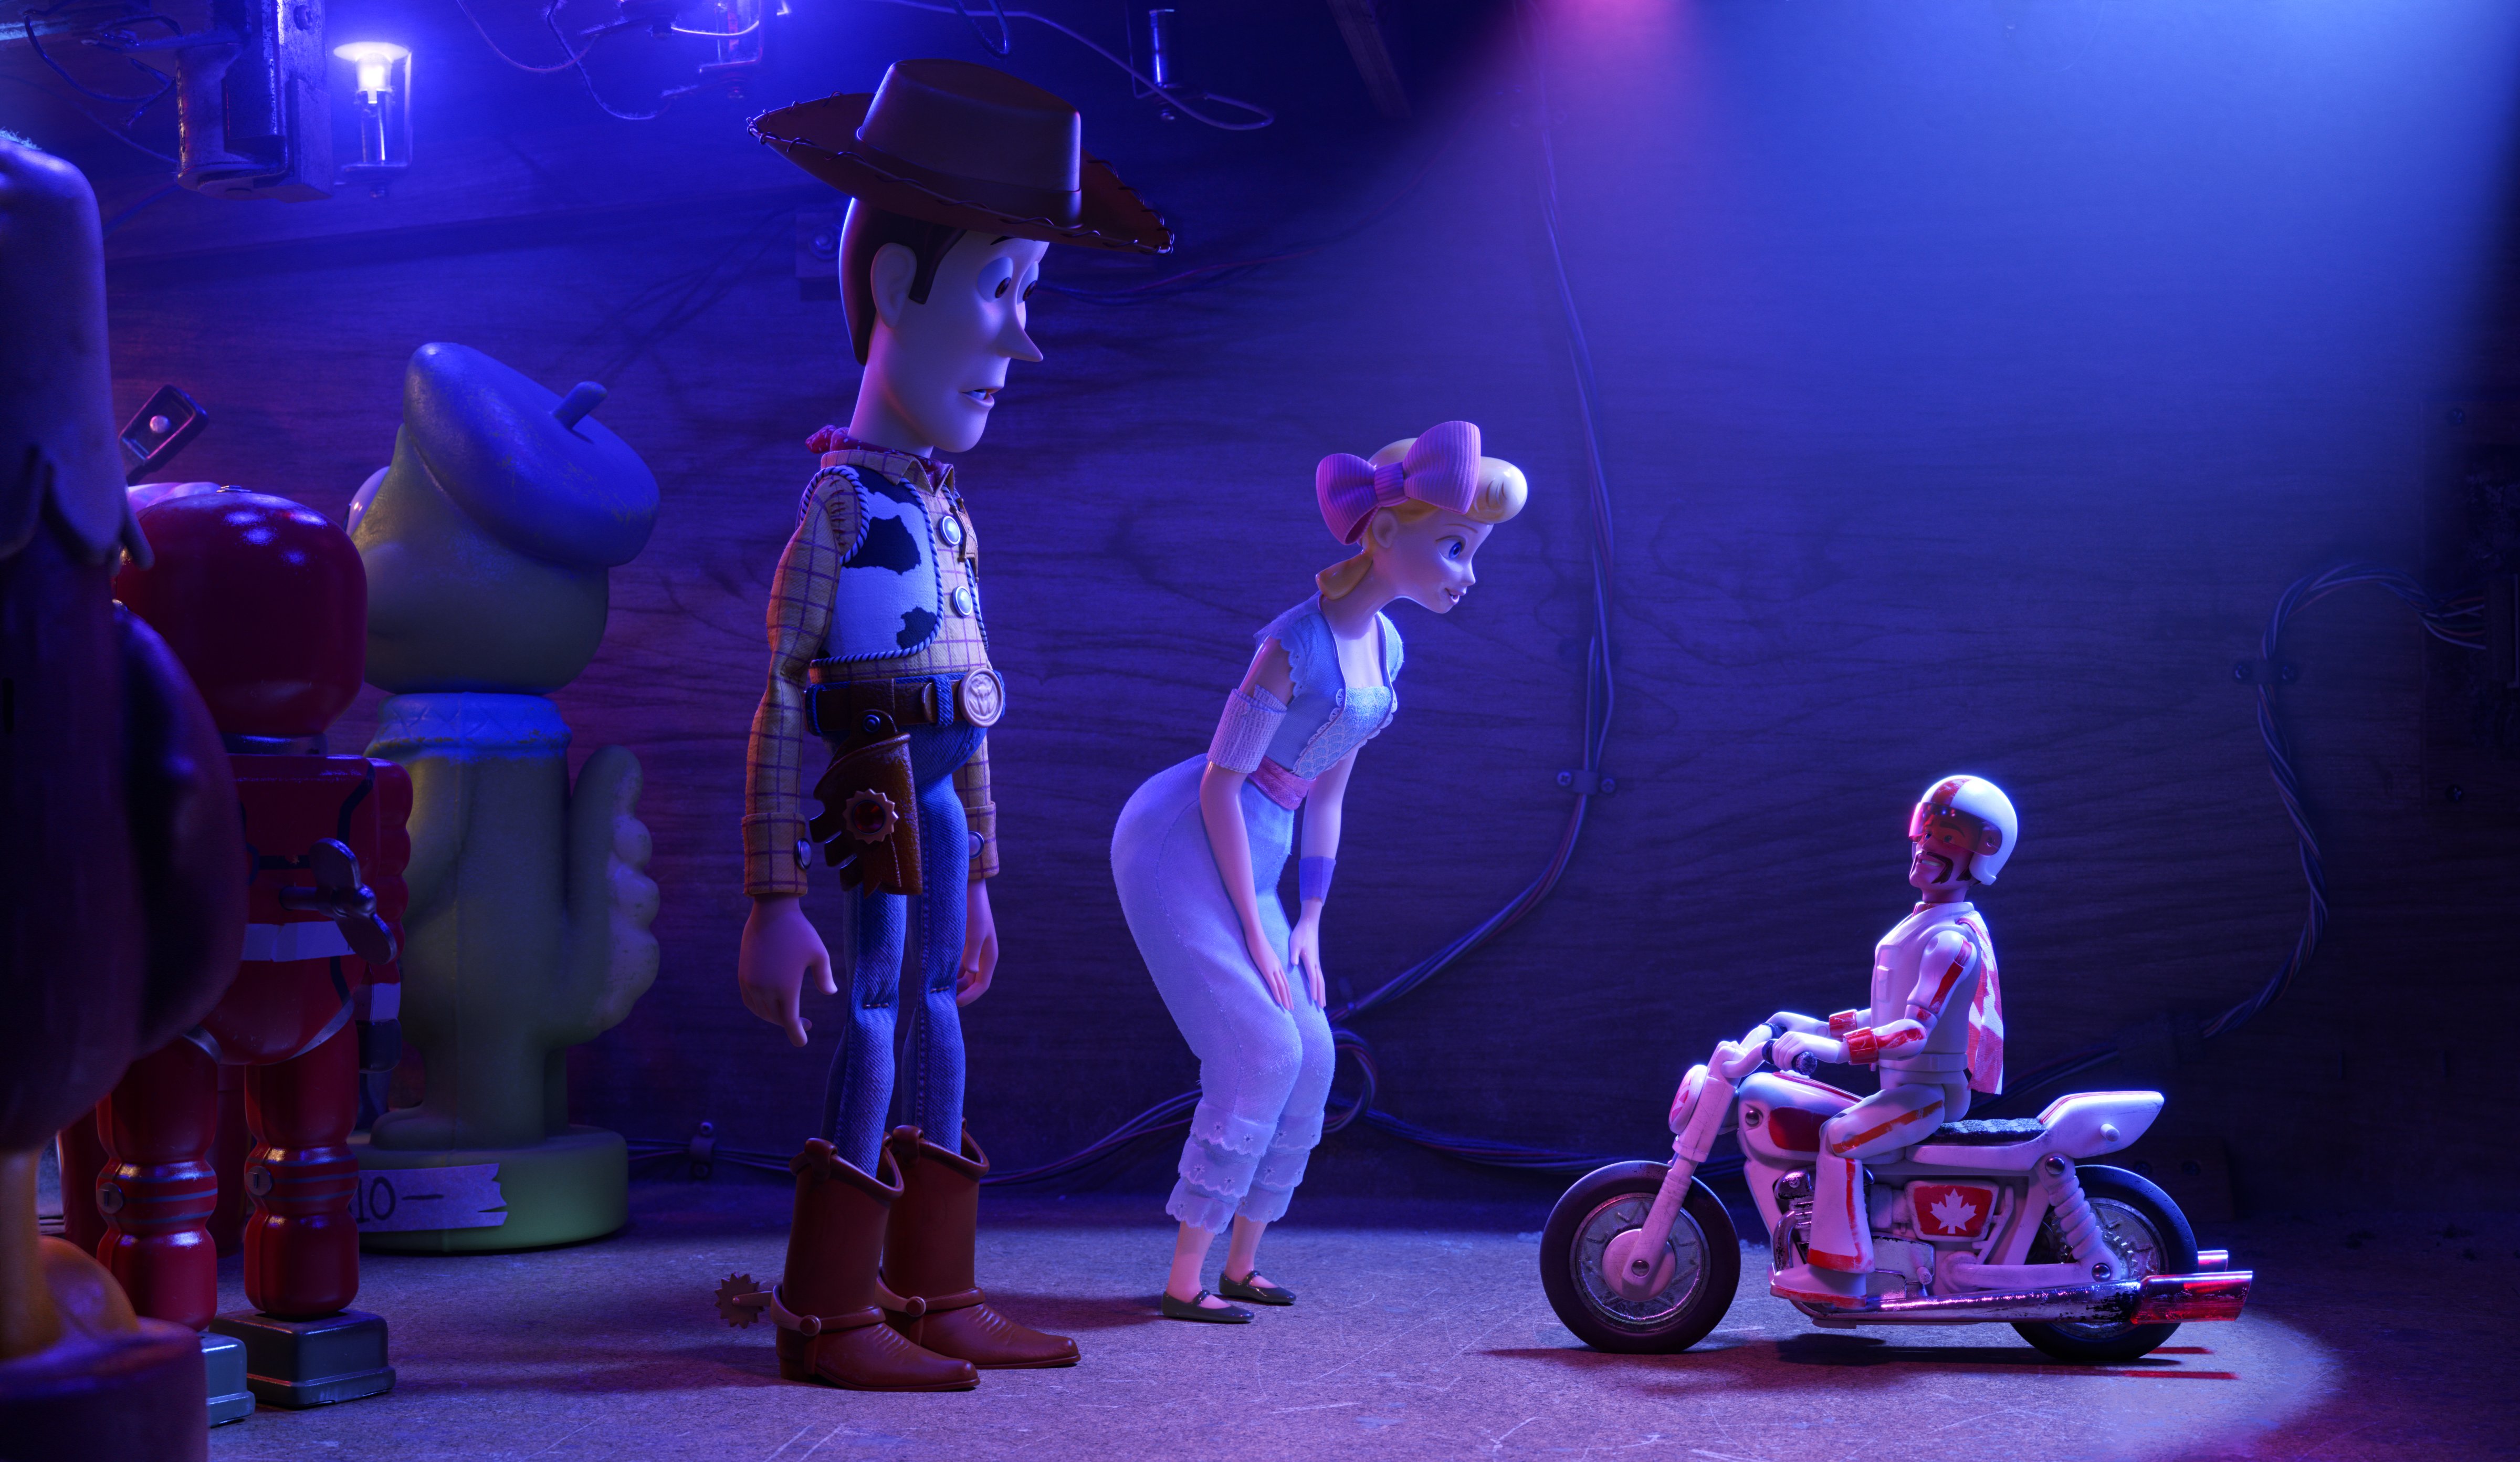 Tom Hanks as the voice of Woody, Annie Potts as the voice of Bo Peep, and Keanu Reeves as the voice of Duke Caboom in <i>Toy Story 4</i> (Disney/Pixar)